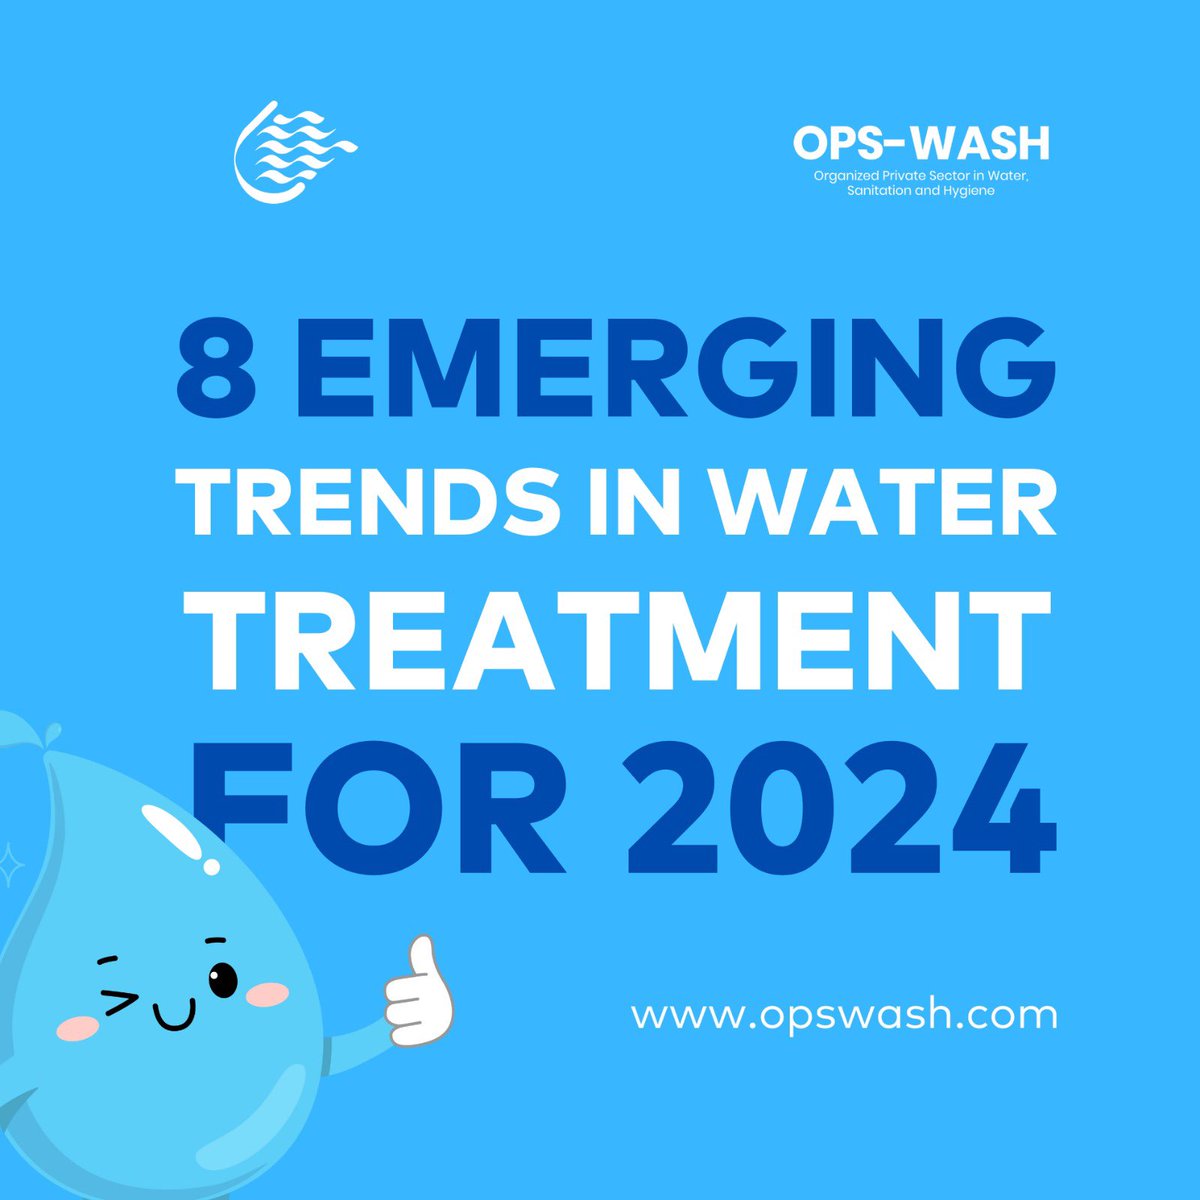 There are some major water treatment trends shaping the industry for 2024: 1. Digital Water Management 2. Wastewater Processing 3. Advanced Filtration 4. Flood Prevention 5. Water-saving Technology 6. Decentralized Infrastructure 7. Innovative Materials 8. Desalination #water 💧